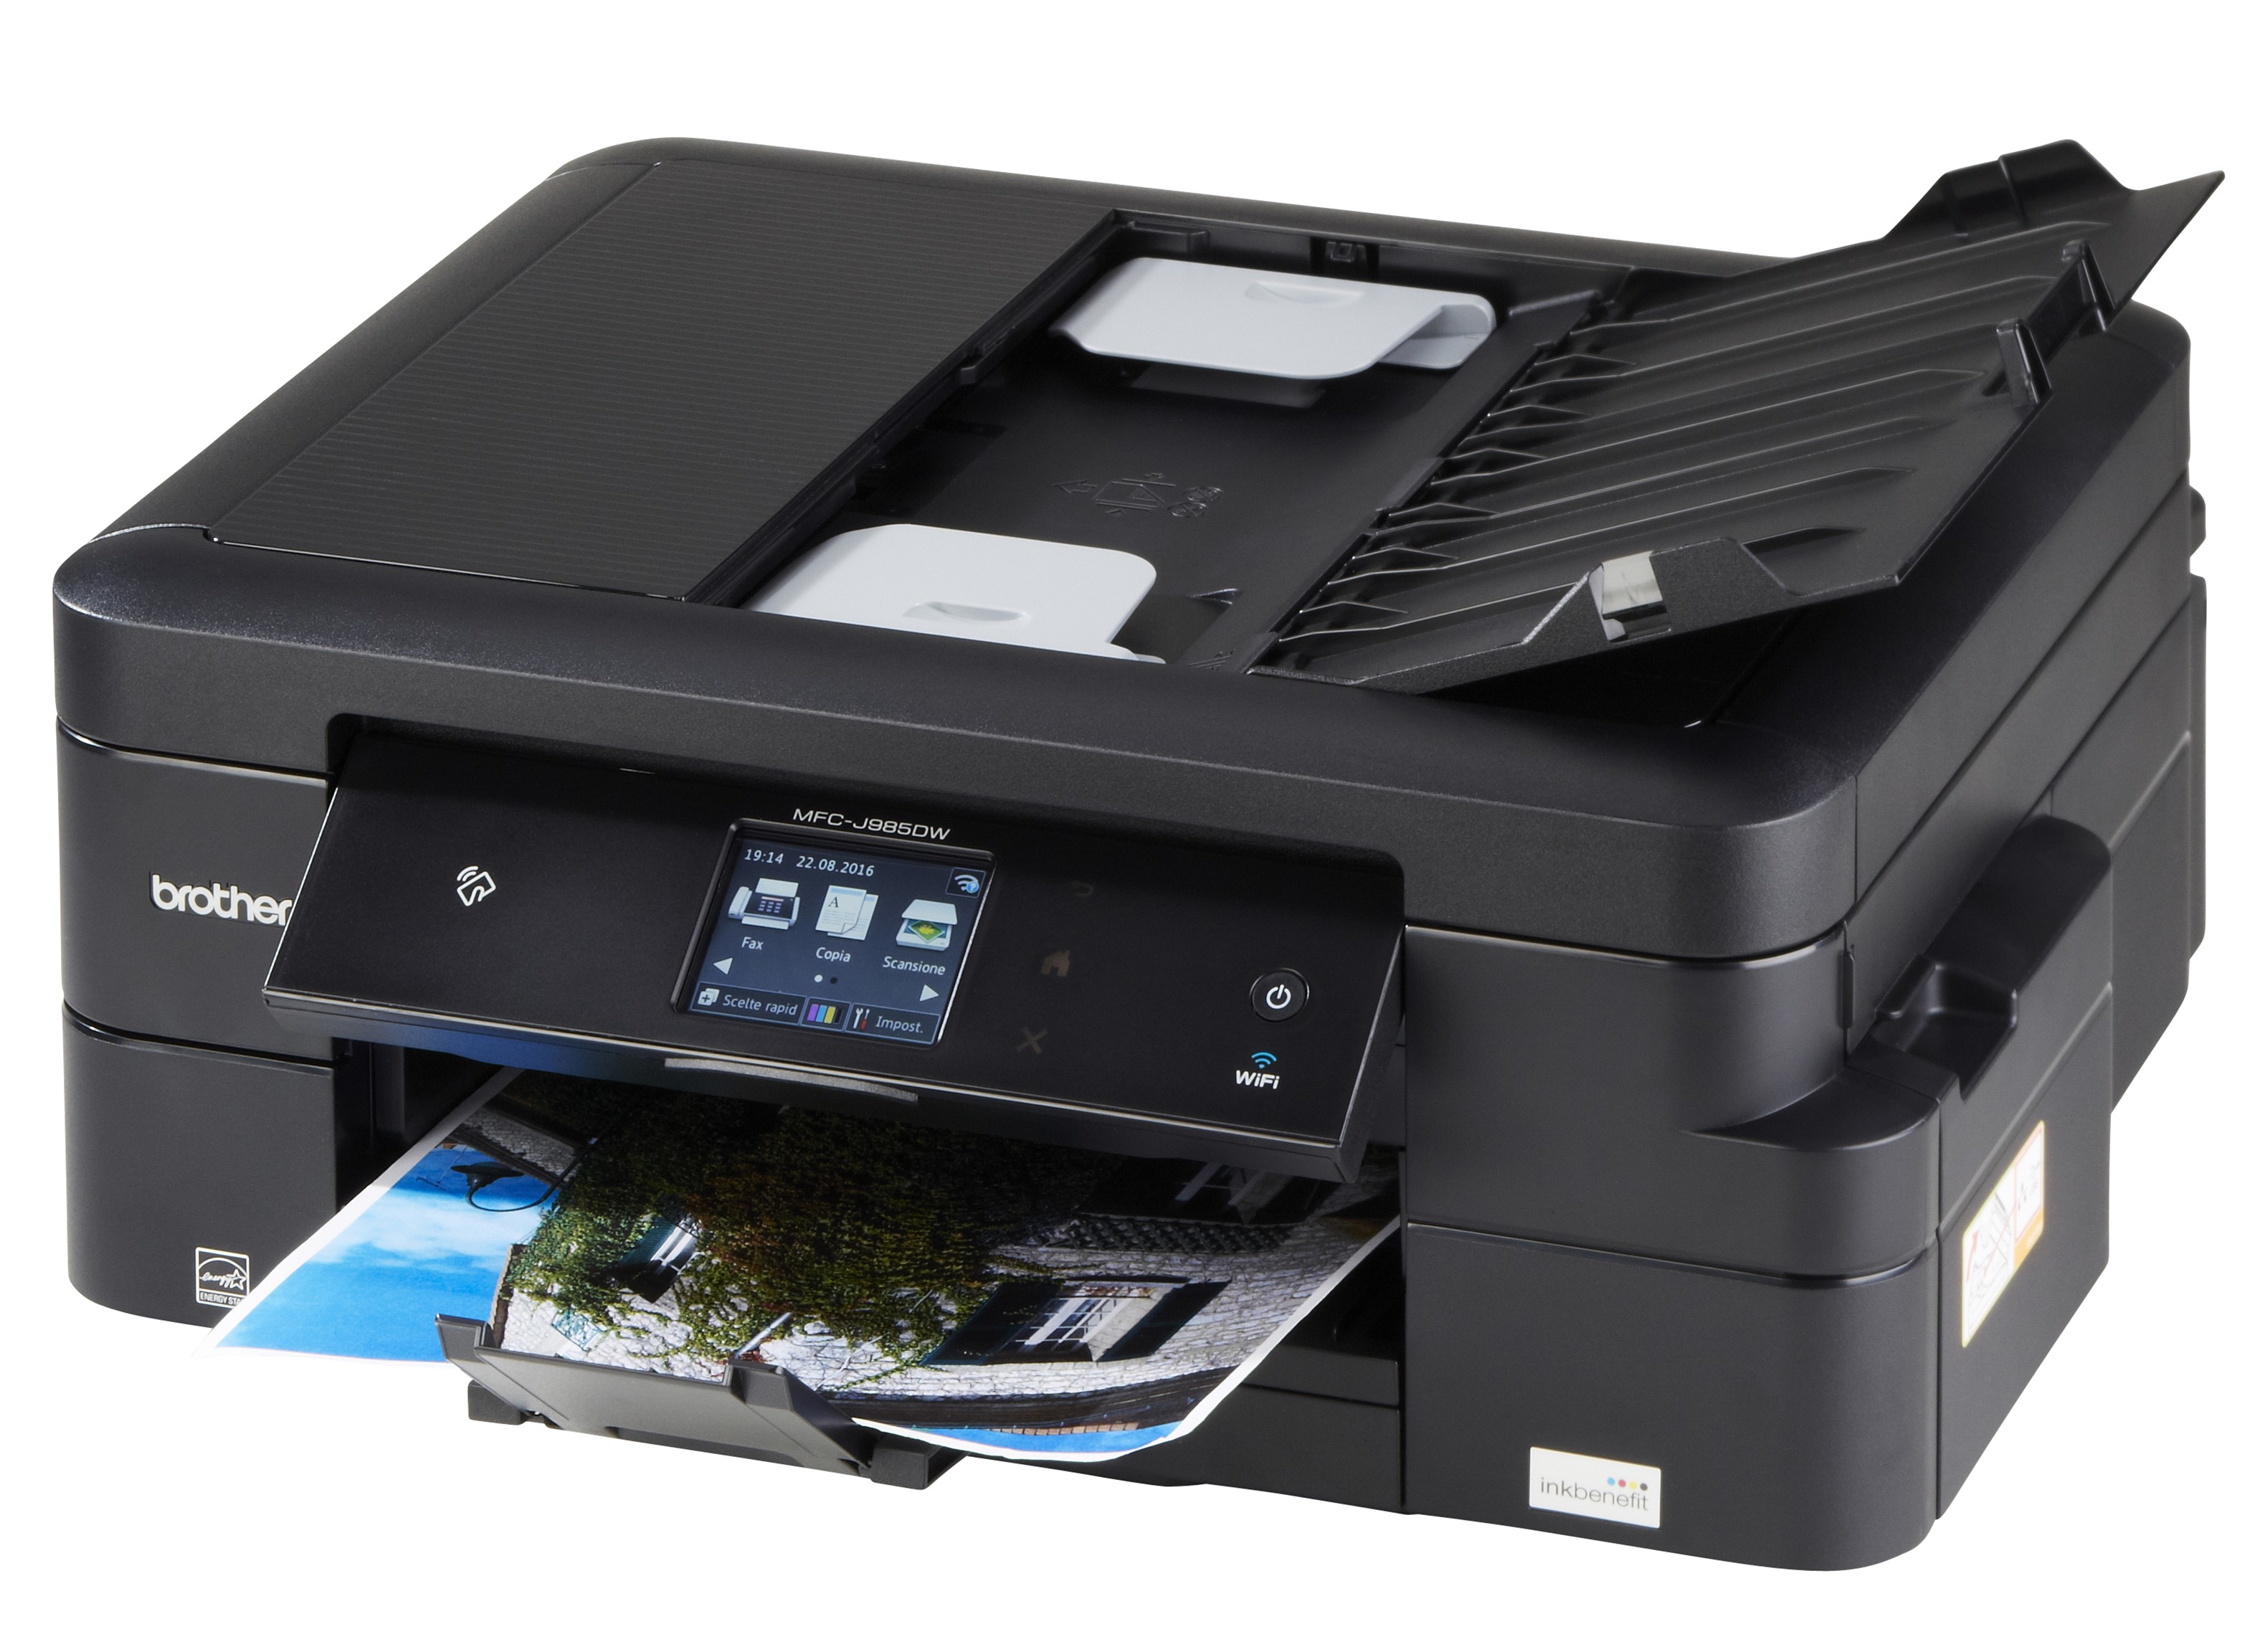 Brother MFC-J985DW Printer Review - Consumer Reports